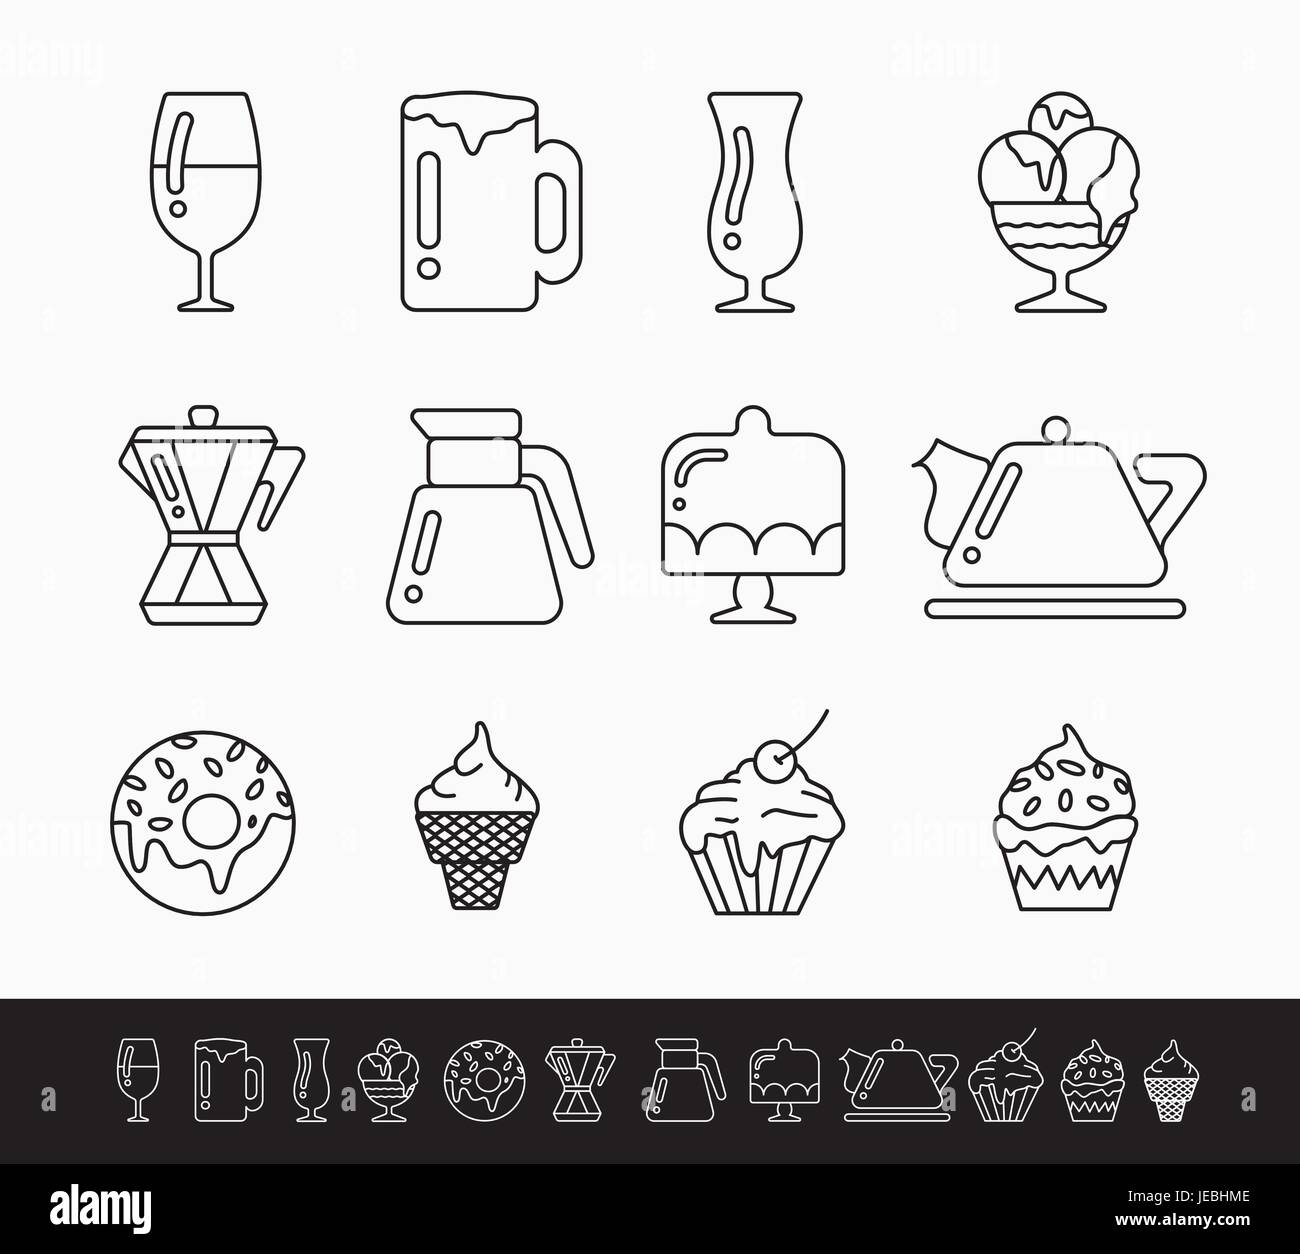 set of black and white linear icons on the theme of food, drinks and kitchen devices. Stock Vector